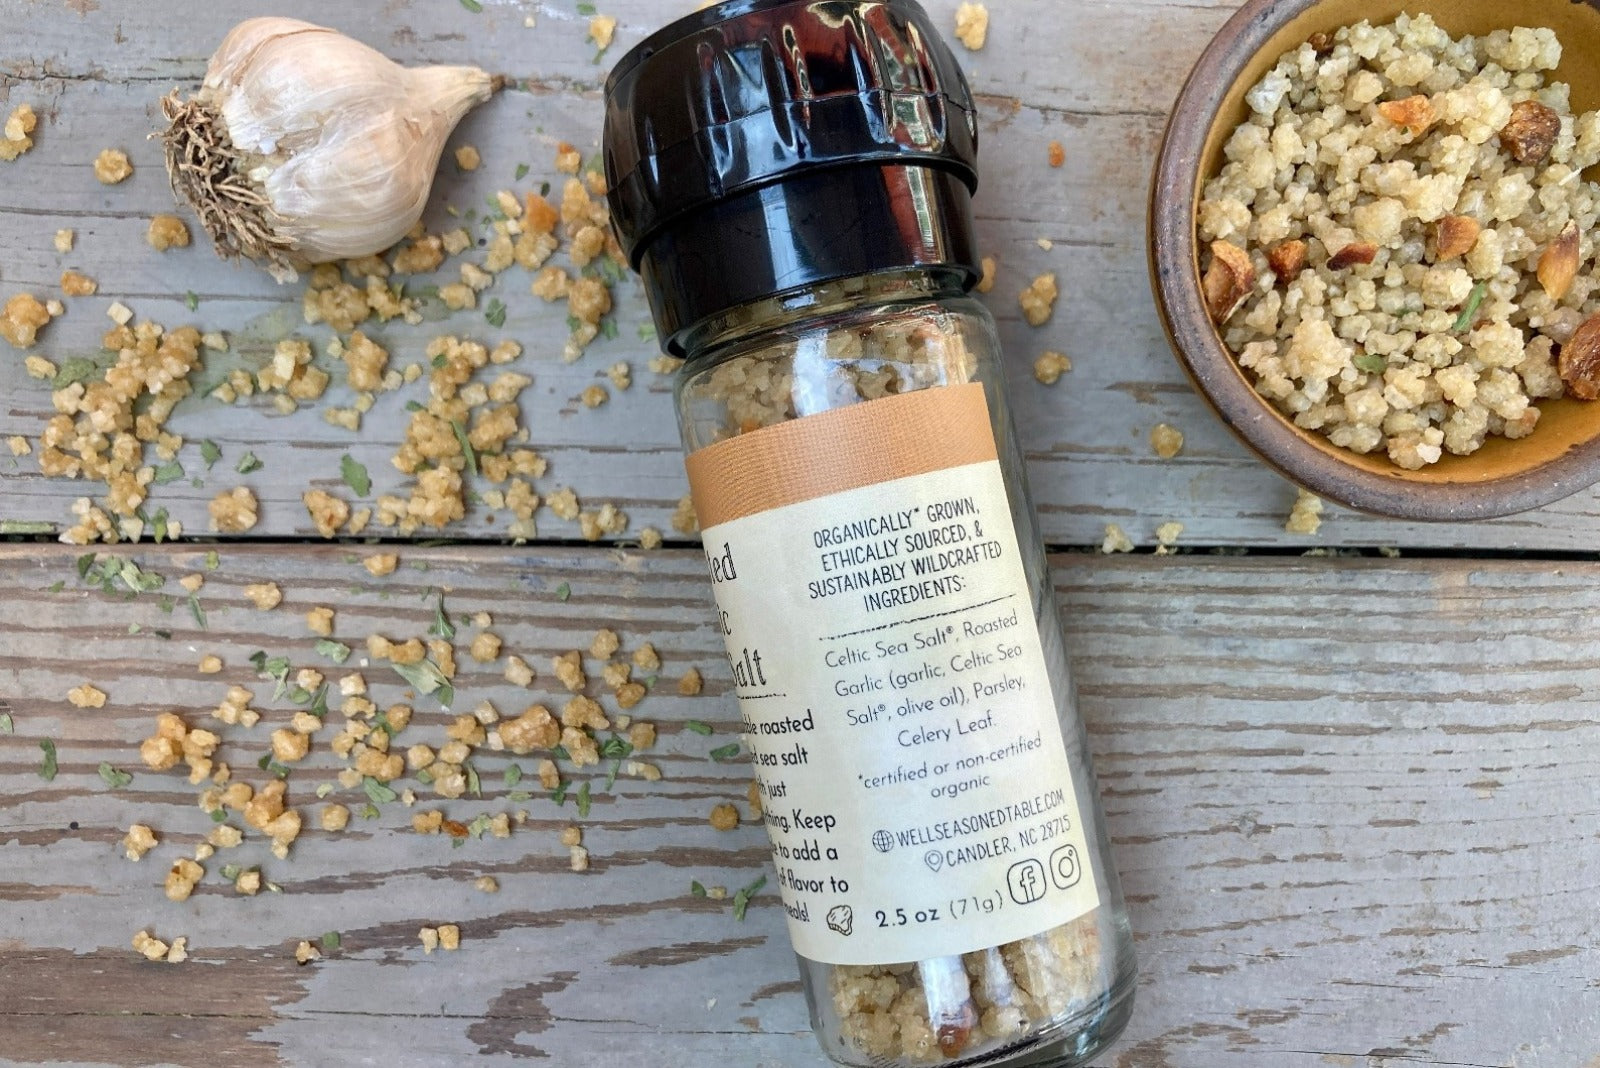 The side of a glass grinder jar of Roasted Garlic Sea Salt on a wooden background with a bowl of the infused sea salt from Well Seasoned Table.